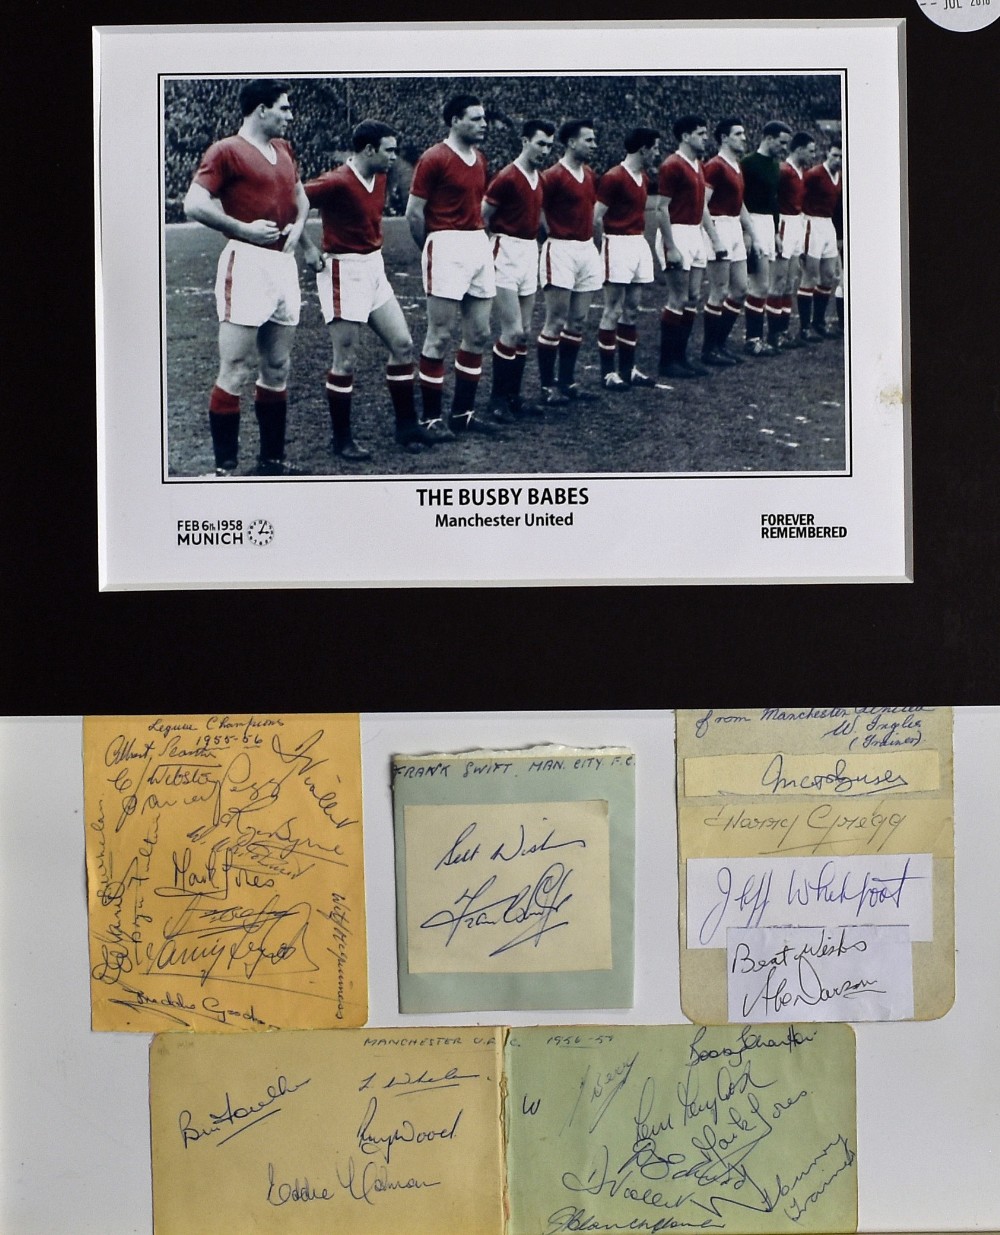 Framed montage of Manchester United 'The Busby Babes - Forever Remembered' with a collection of